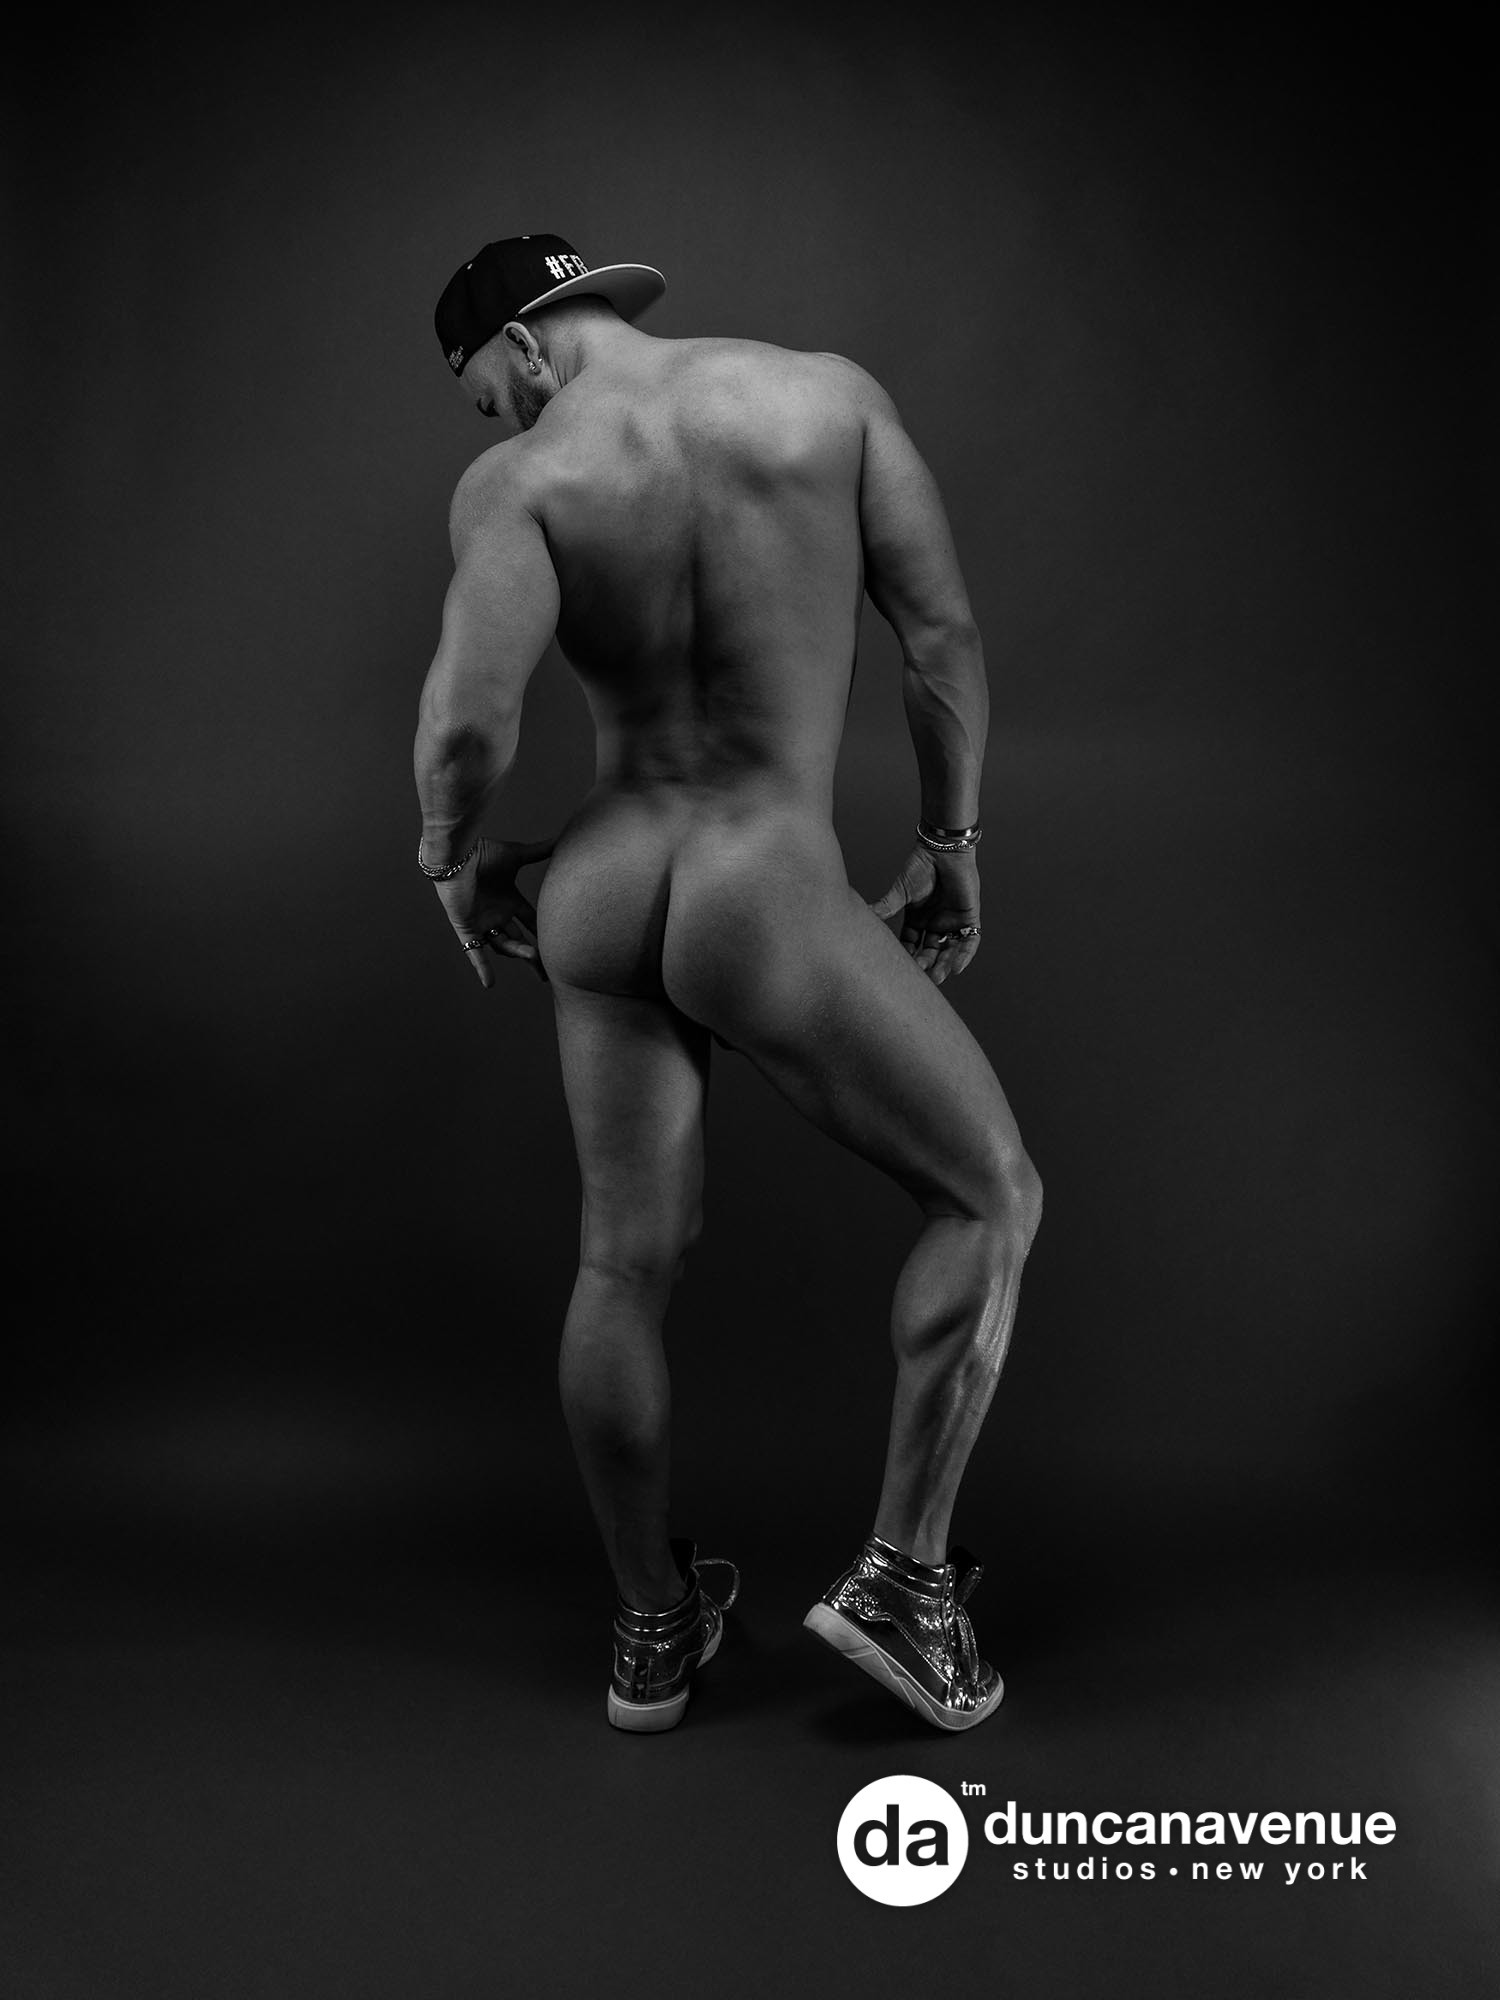 Maxwell Alexander: Pioneering Fine Art Nude Male Photography & Challenging Outdated Social Norms on Nudity and Sexuality